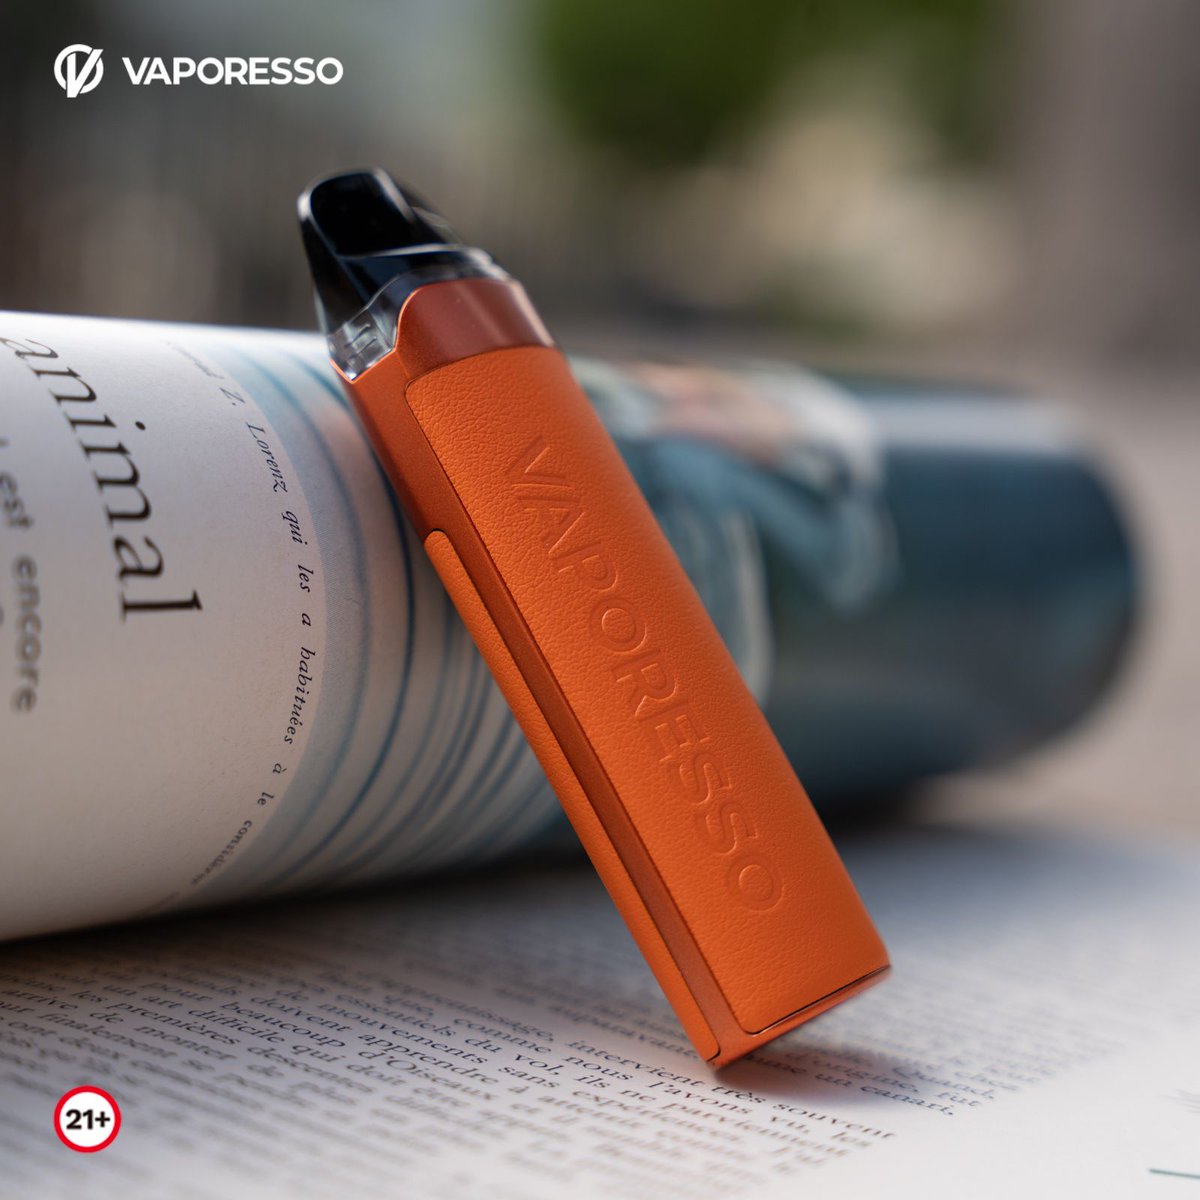 🌈🌈
🆕👁️‍🗨️Having a good time with my #vaporessoluxeq2 in orange, what about you?🟠

🔥❗️Weekly sale - 17% off: WSHC
✔️Built-in 1000mAh battery
✔️3ml pod capacity
🙋All 5 colors available now🧡💚🖤💙🔘
..
💃Get yours:👇
healthcabin.net/vaporesso-luxe…
>
#vaporesso #luxeq2pod #luxeq2